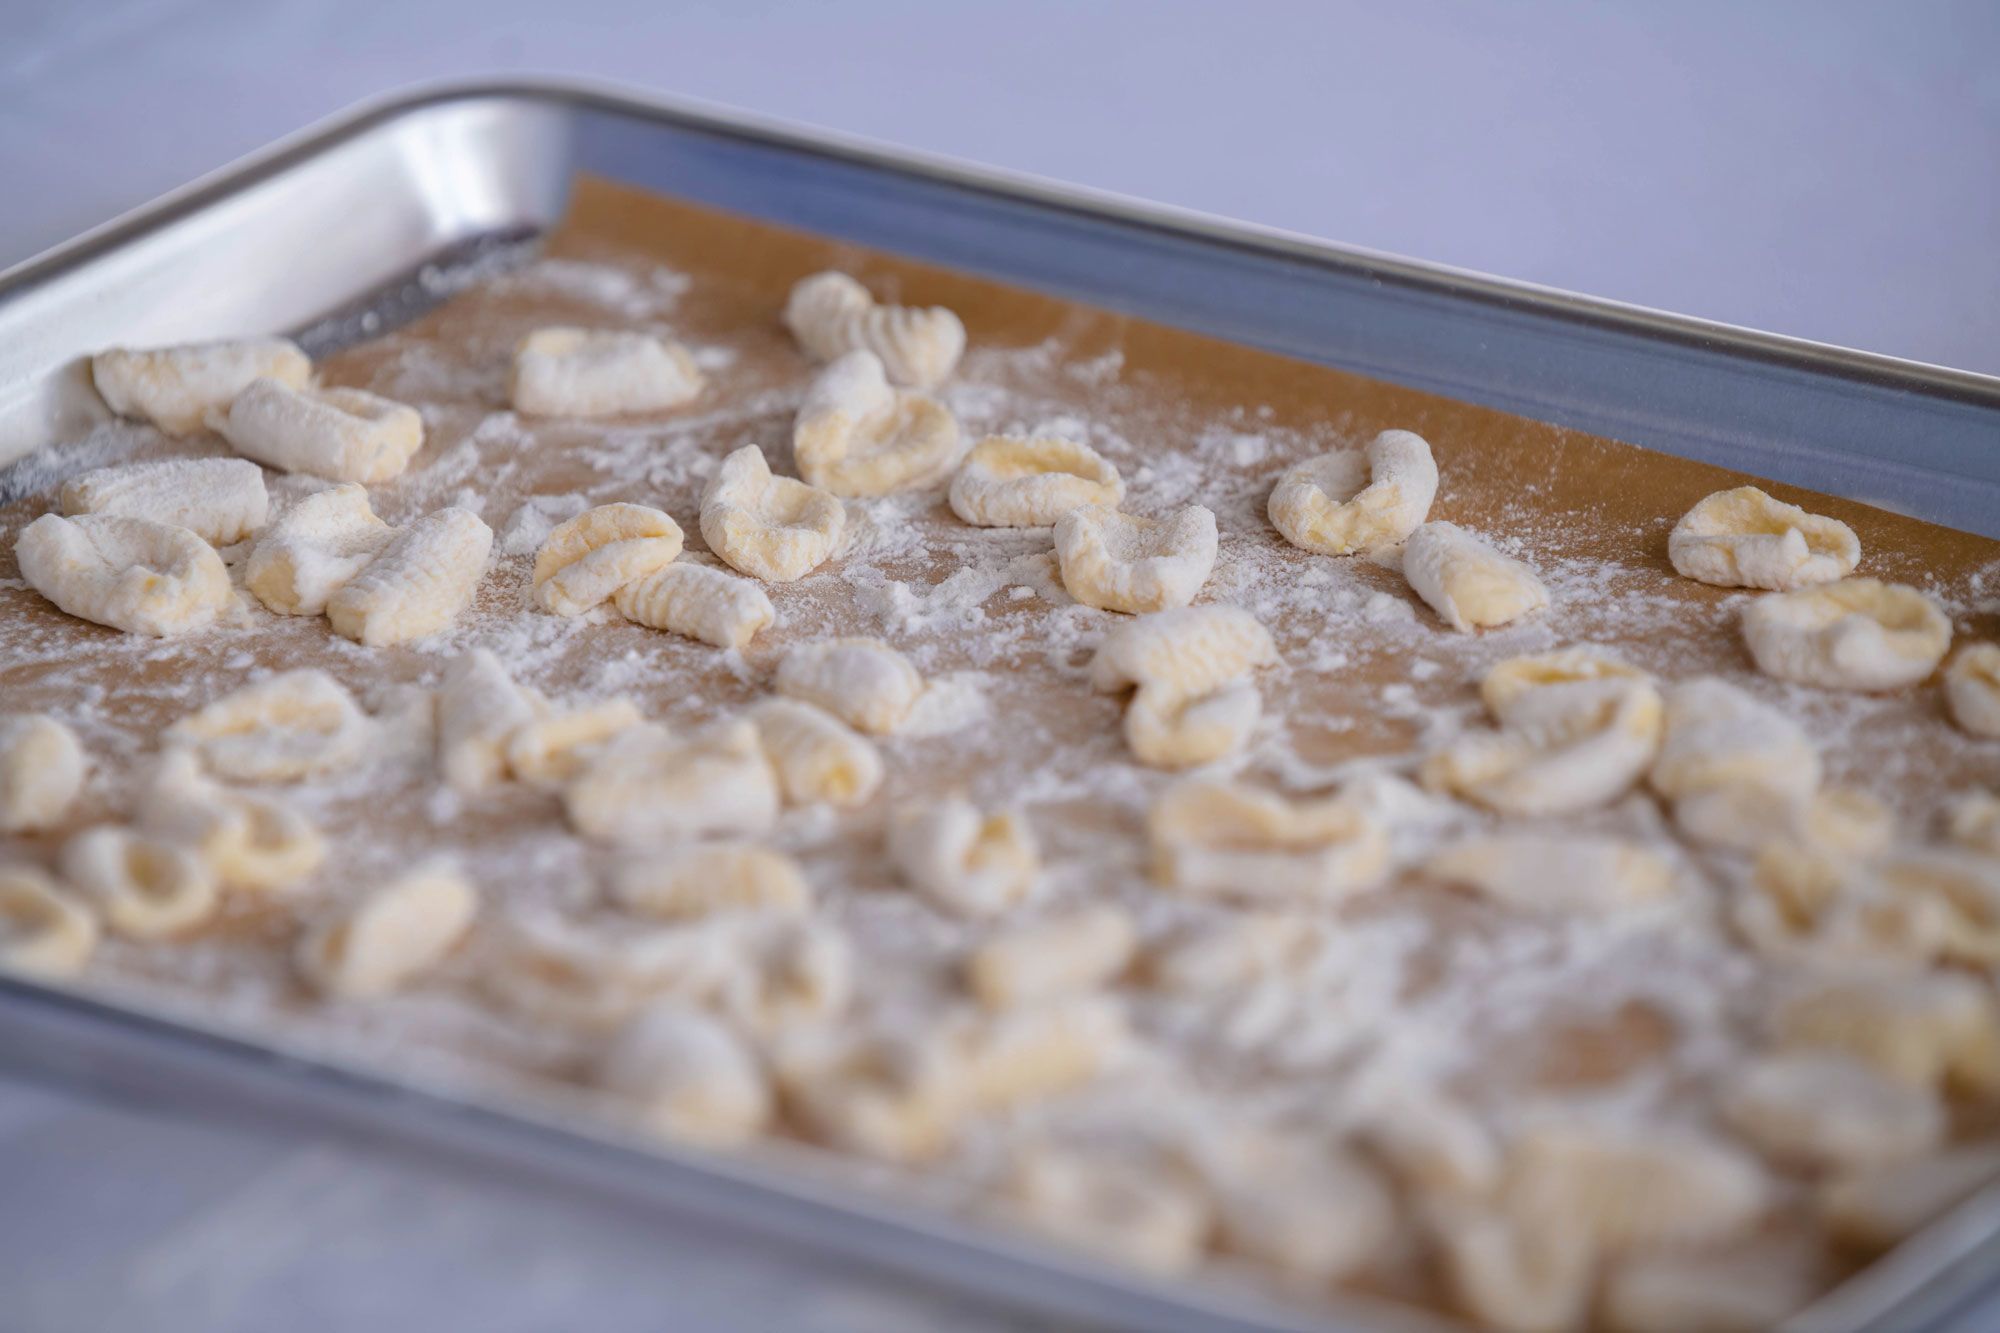 Gnocchi on a baking tray, prepped for cooking